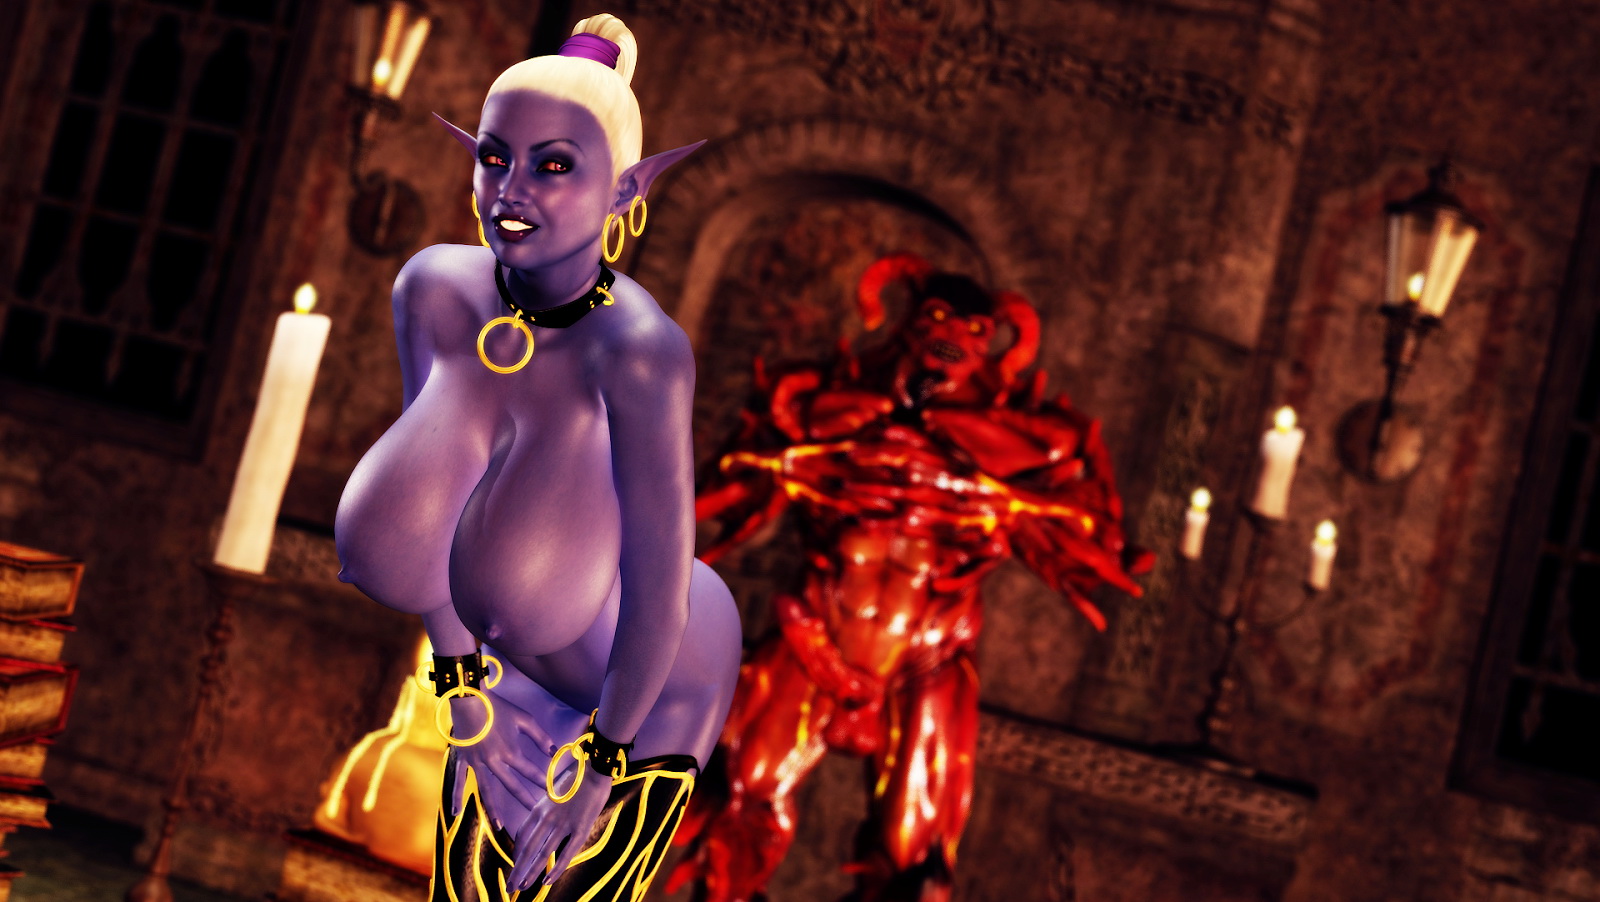 3d Elf Girl Fucked By Demons - Busty 3D elf sorceress ravaged by a summoned 3D demon